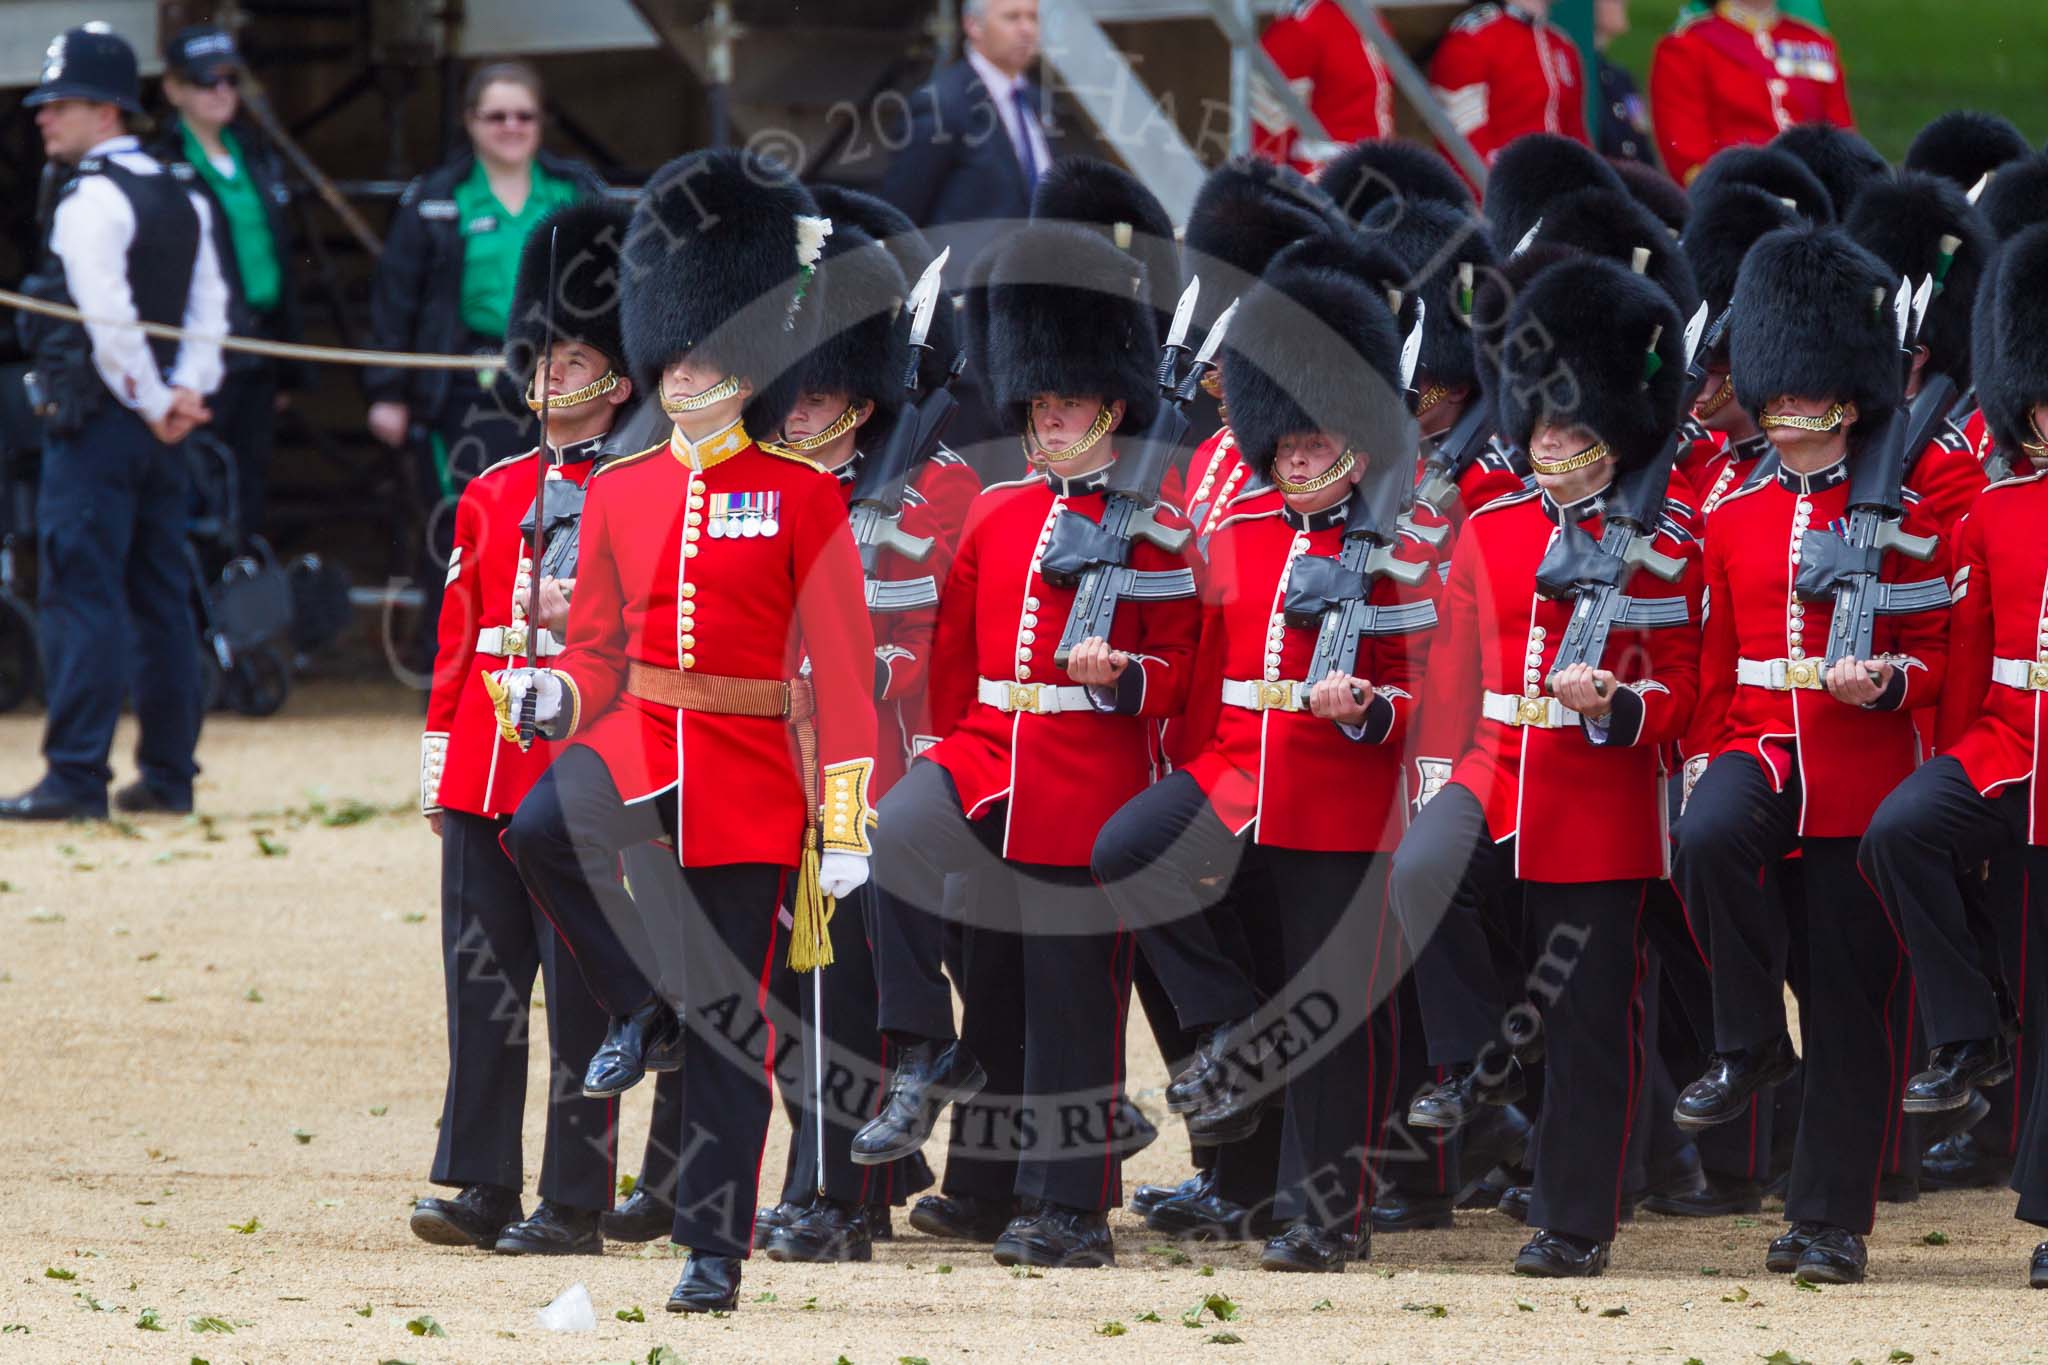 The Colonel's Review 2015.
Horse Guards Parade, Westminster,
London,

United Kingdom,
on 06 June 2015 at 11:31, image #352